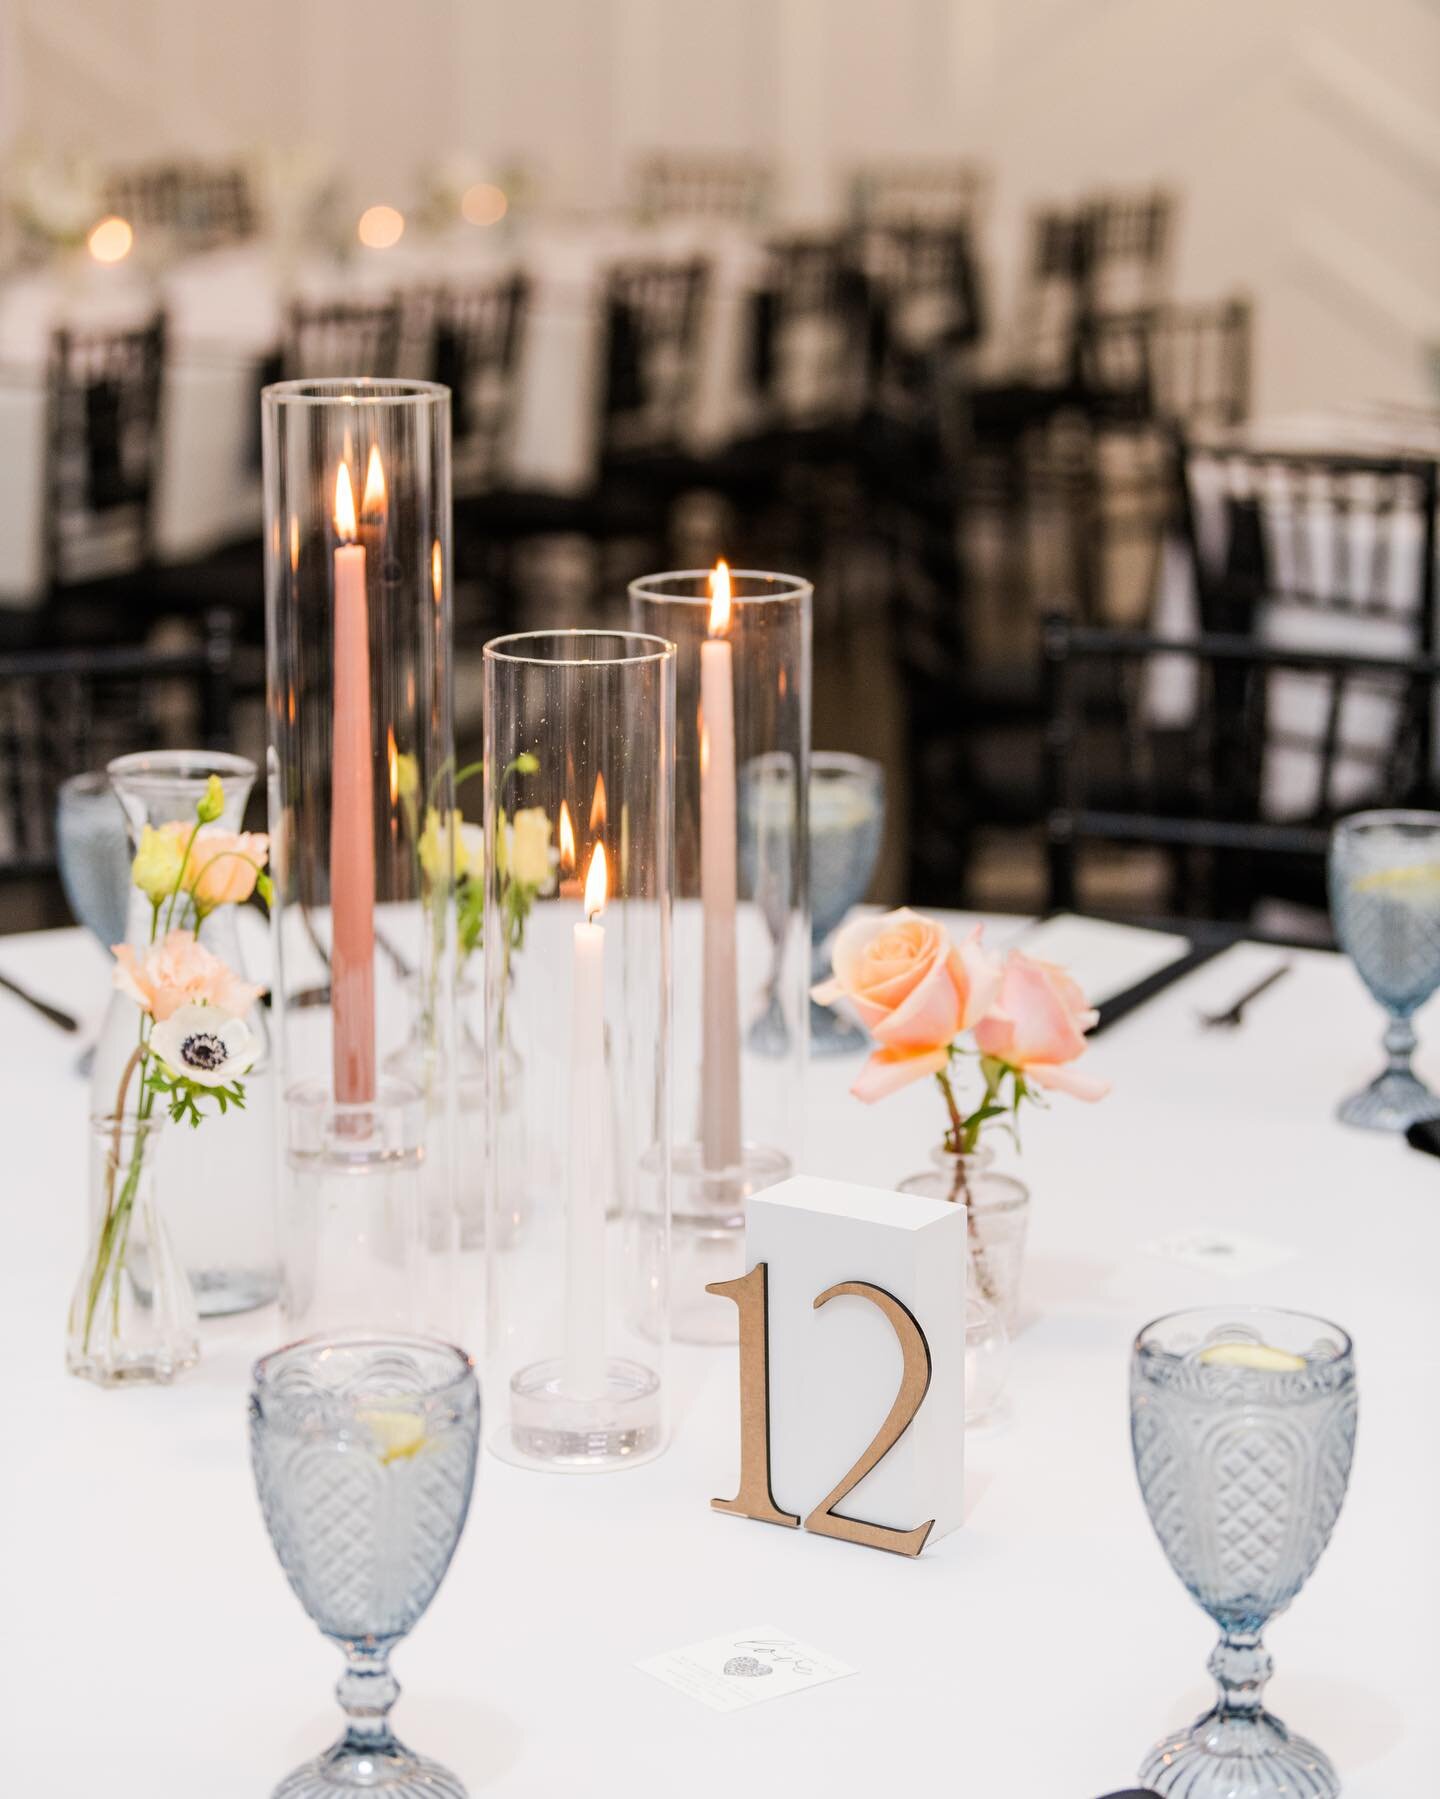 Blooms and candles *chefs kiss* 

What's your centerpiece style?

Photo: @abundantgracephotographymn 
Venue: @mosaicvenuemn 
Rentals: @apreseventandtent 
HMU: @cdmakeupartistry @blissfulbeauty365 
Coordination + floral: @champagne_and_lace 
Video: @t